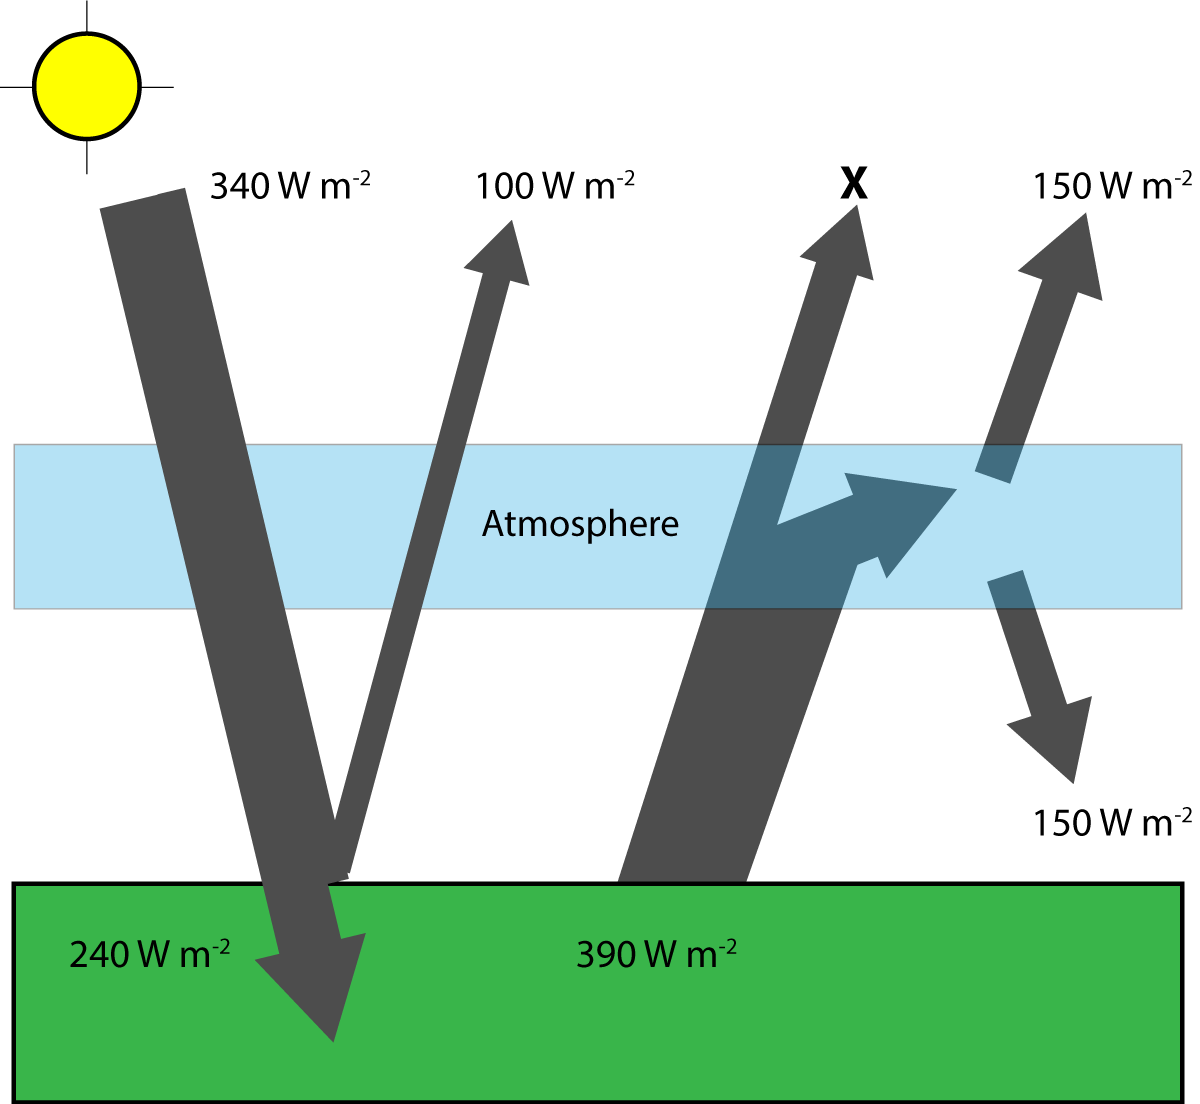 simplified climate model with numbers